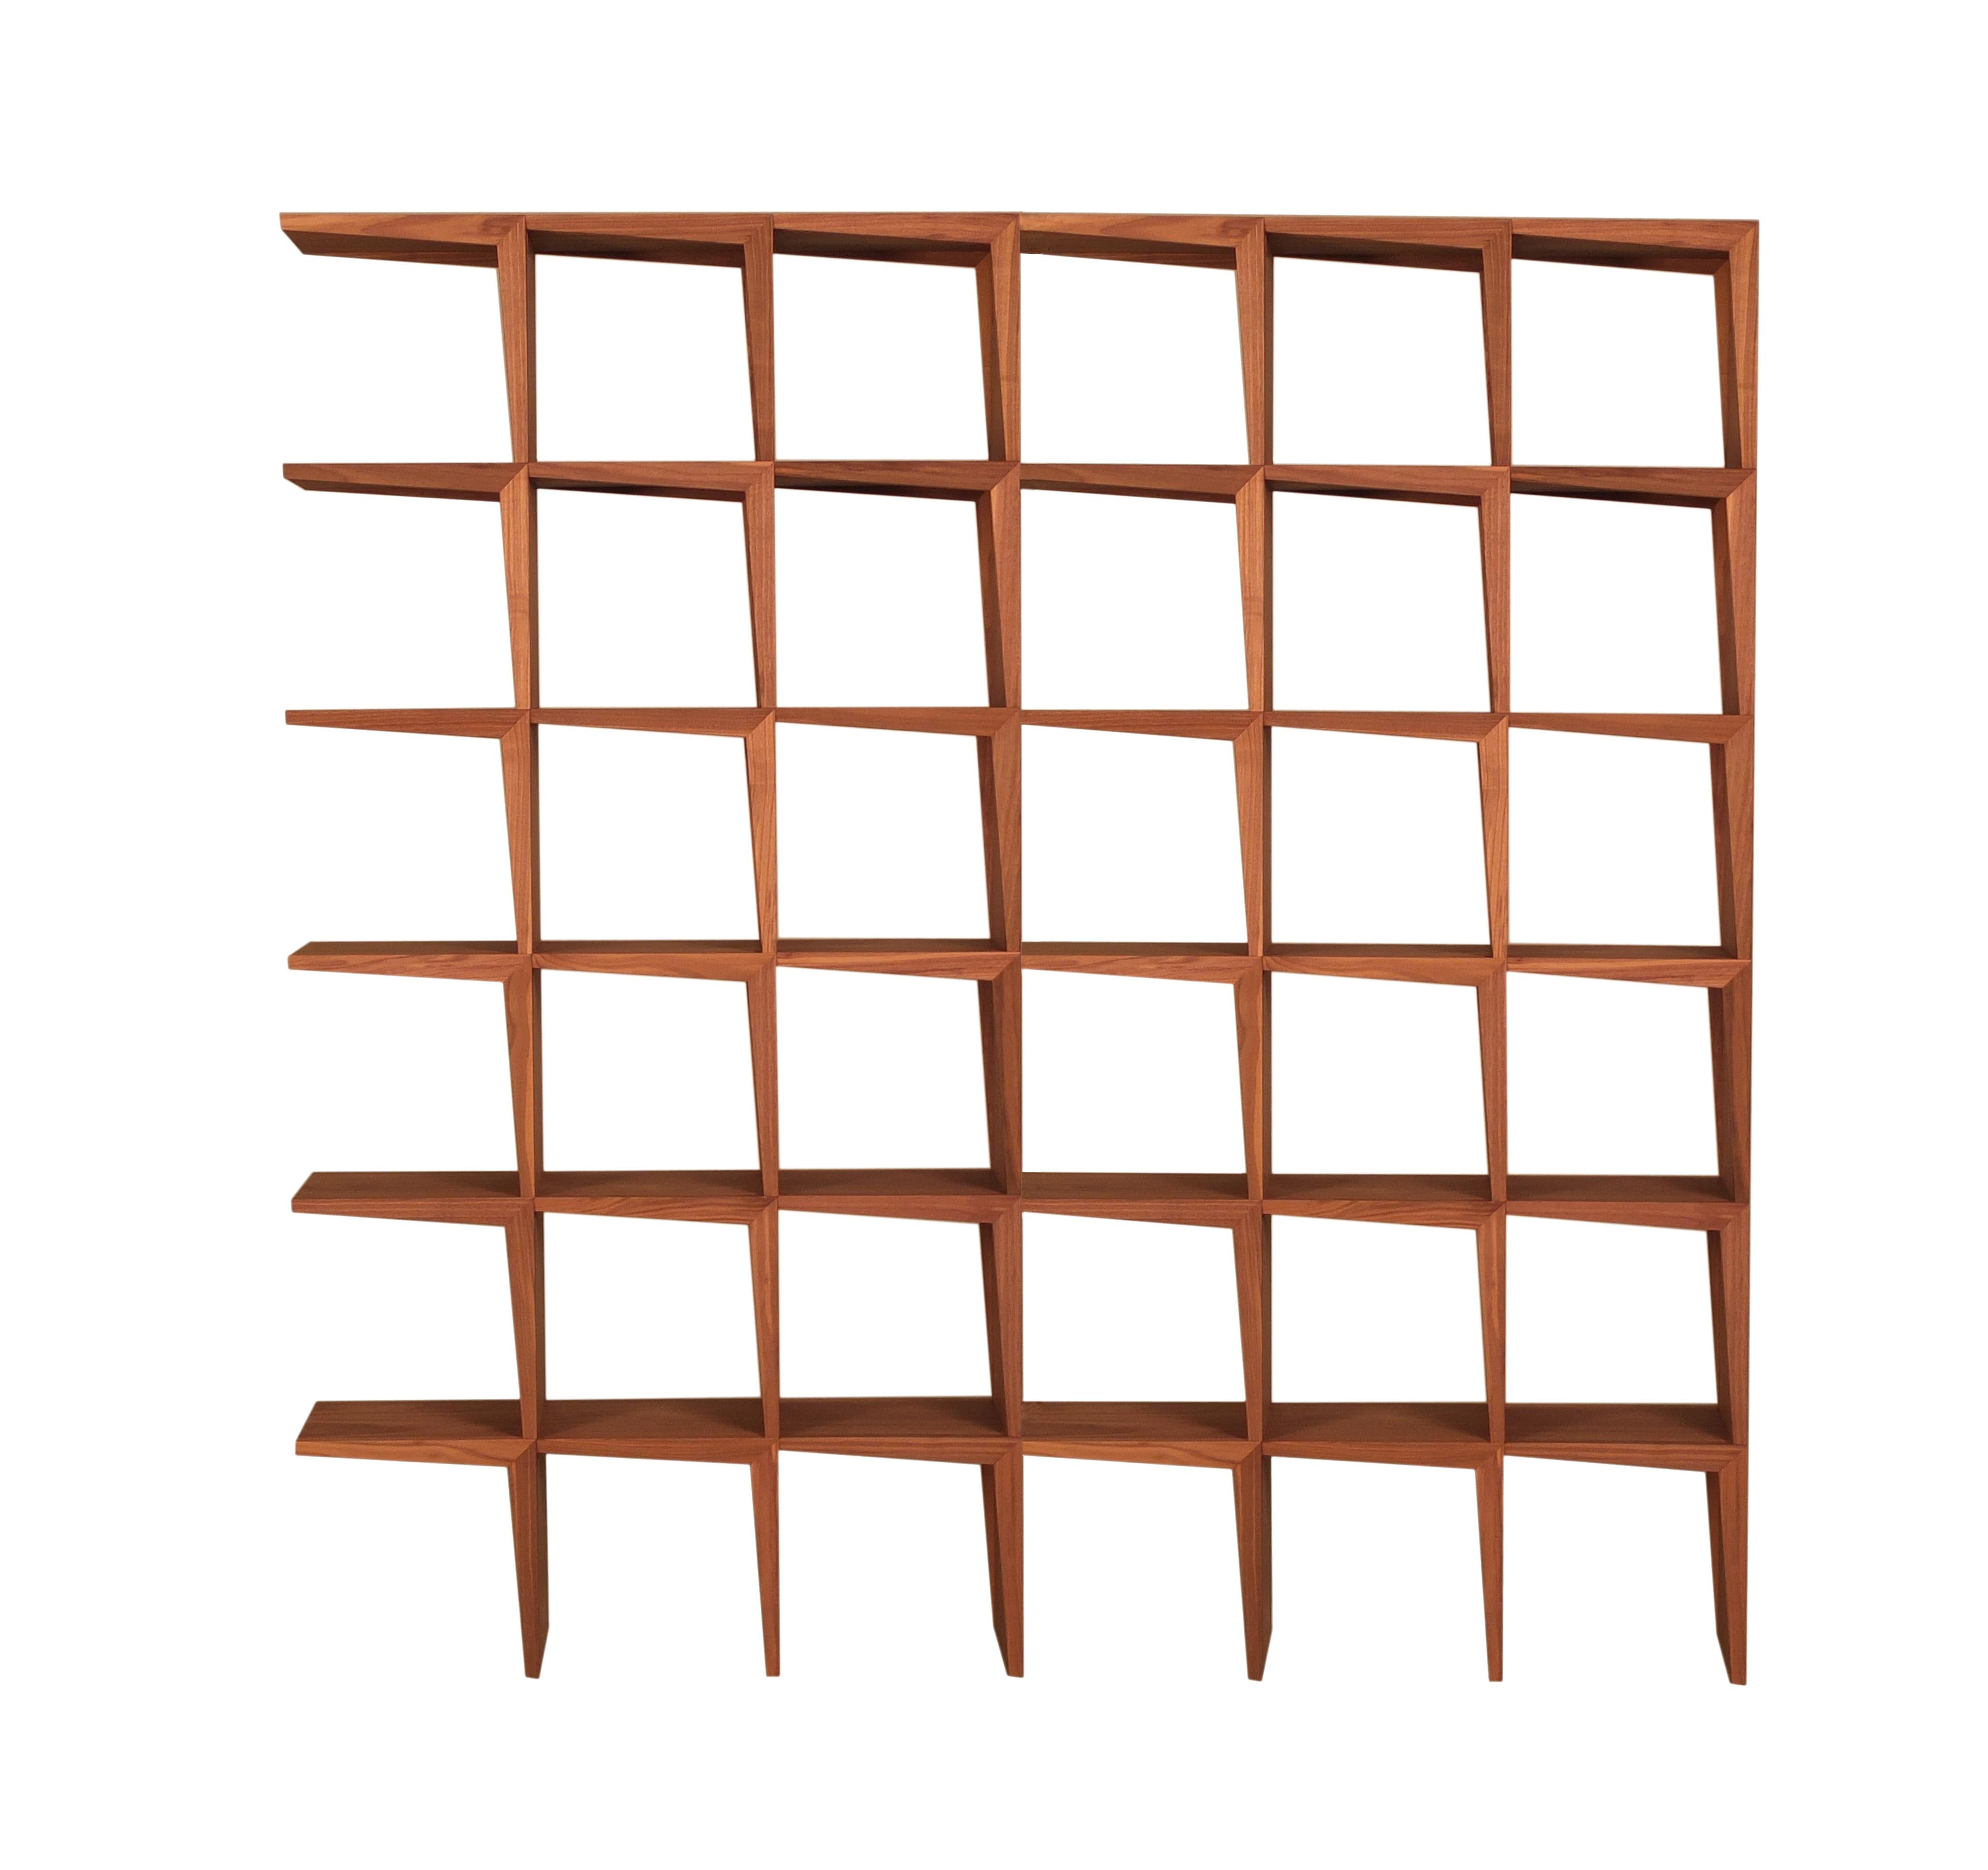 Ash Kant, Freestanding Bookshelf Made of Canaletto Walnut Wood, by Morelato